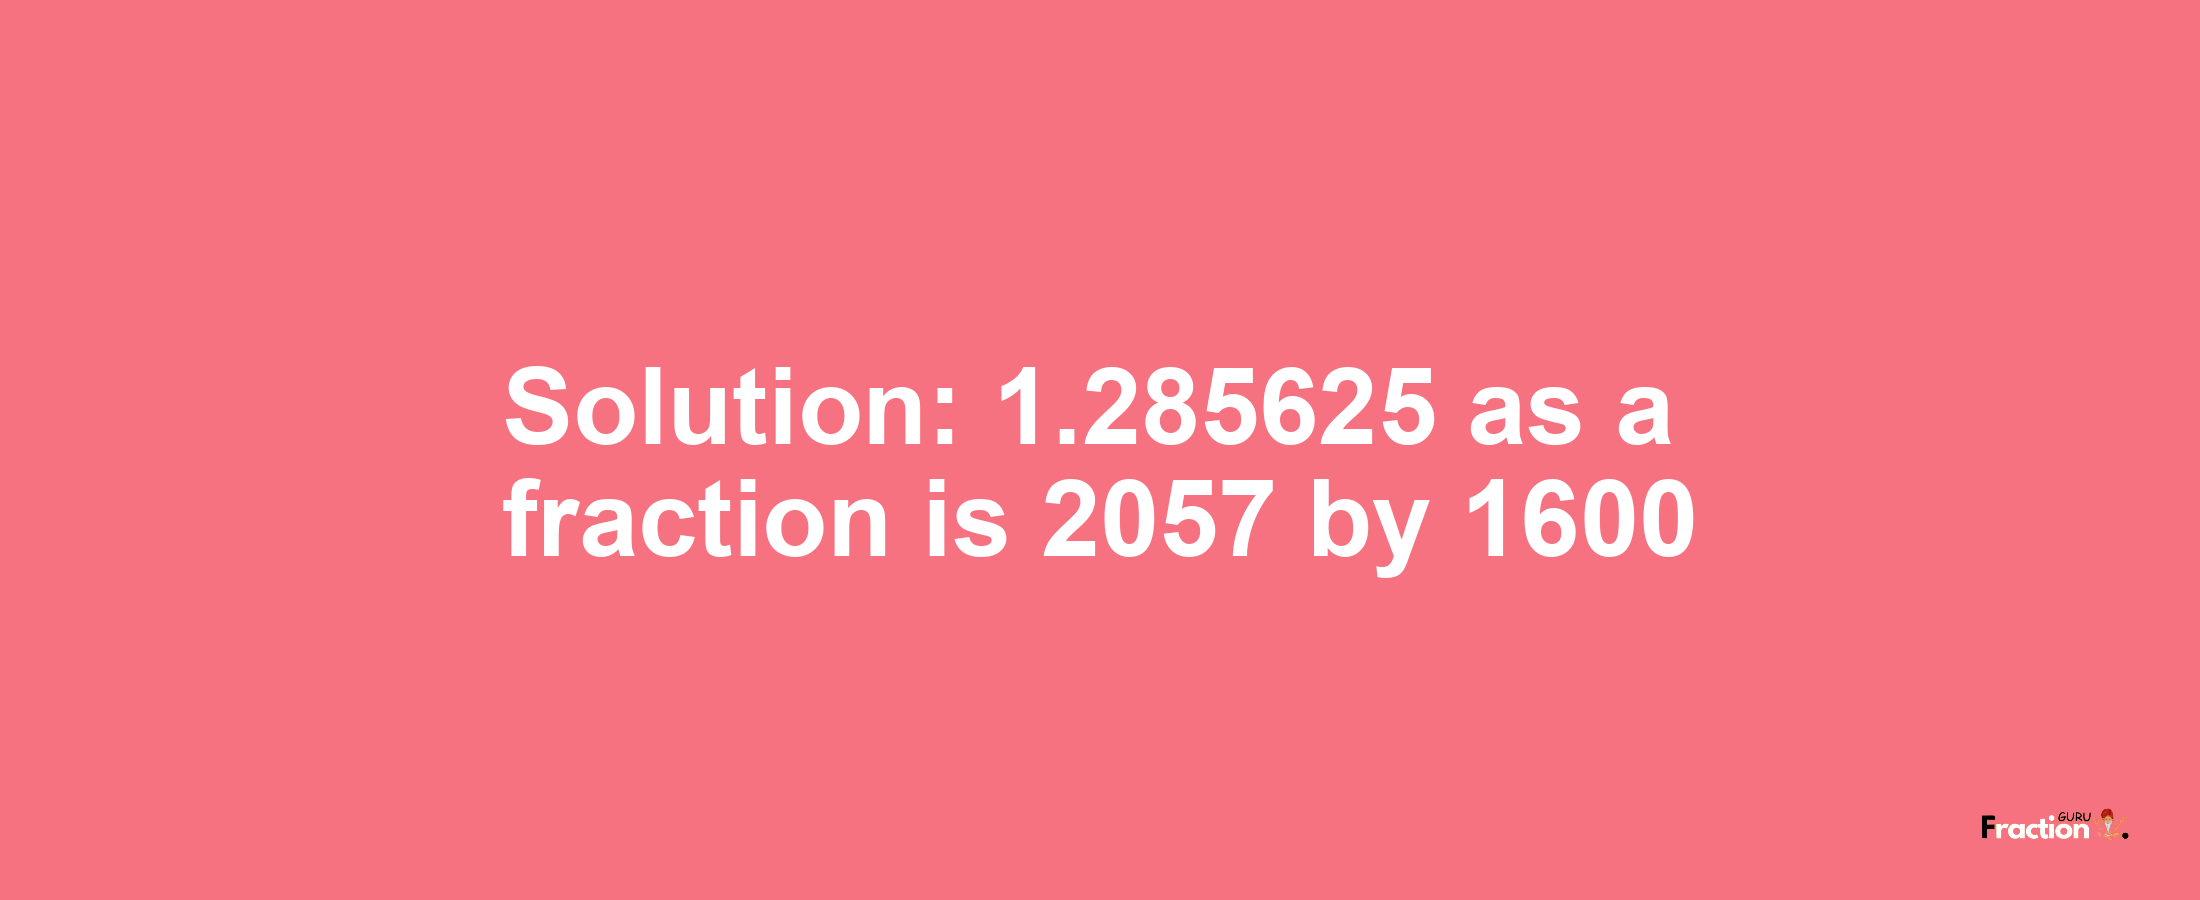 Solution:1.285625 as a fraction is 2057/1600